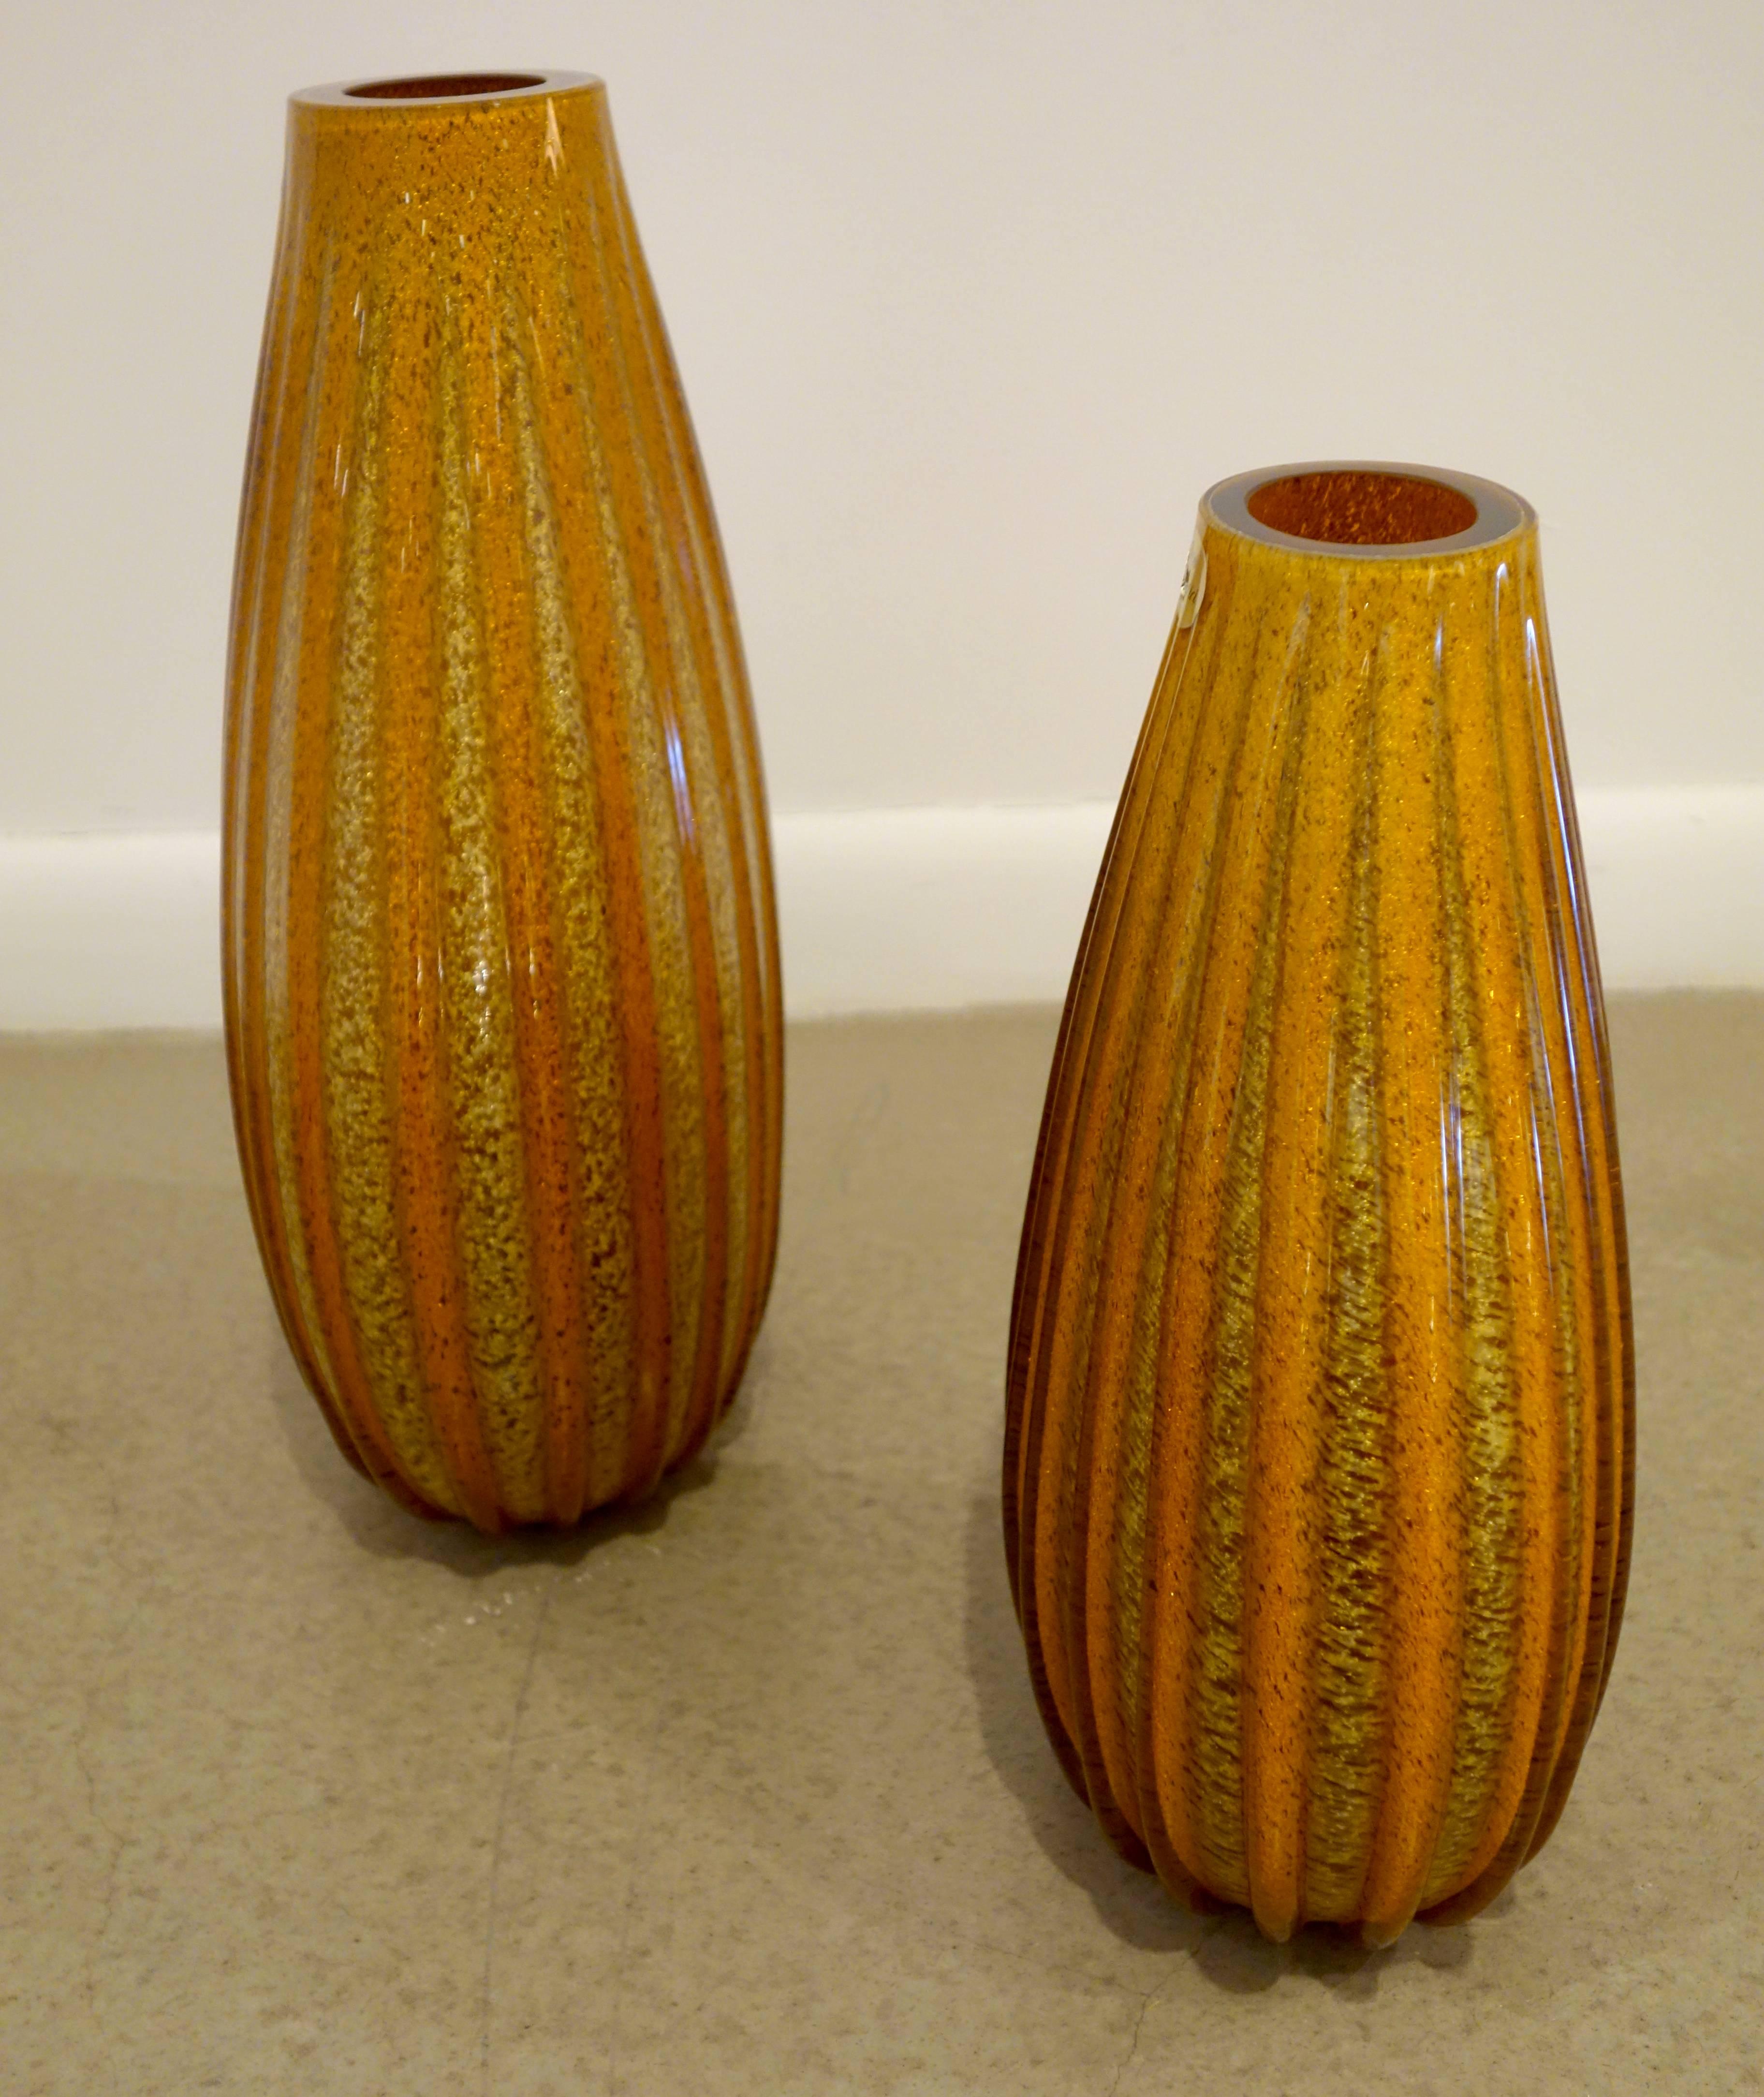 A pair of Italian bulb shaped thick Murano glass vases fluted with orange and gold flecked alternating colors; label by Vetri Artistic. The smaller vase is 12.75" H x 10.W".